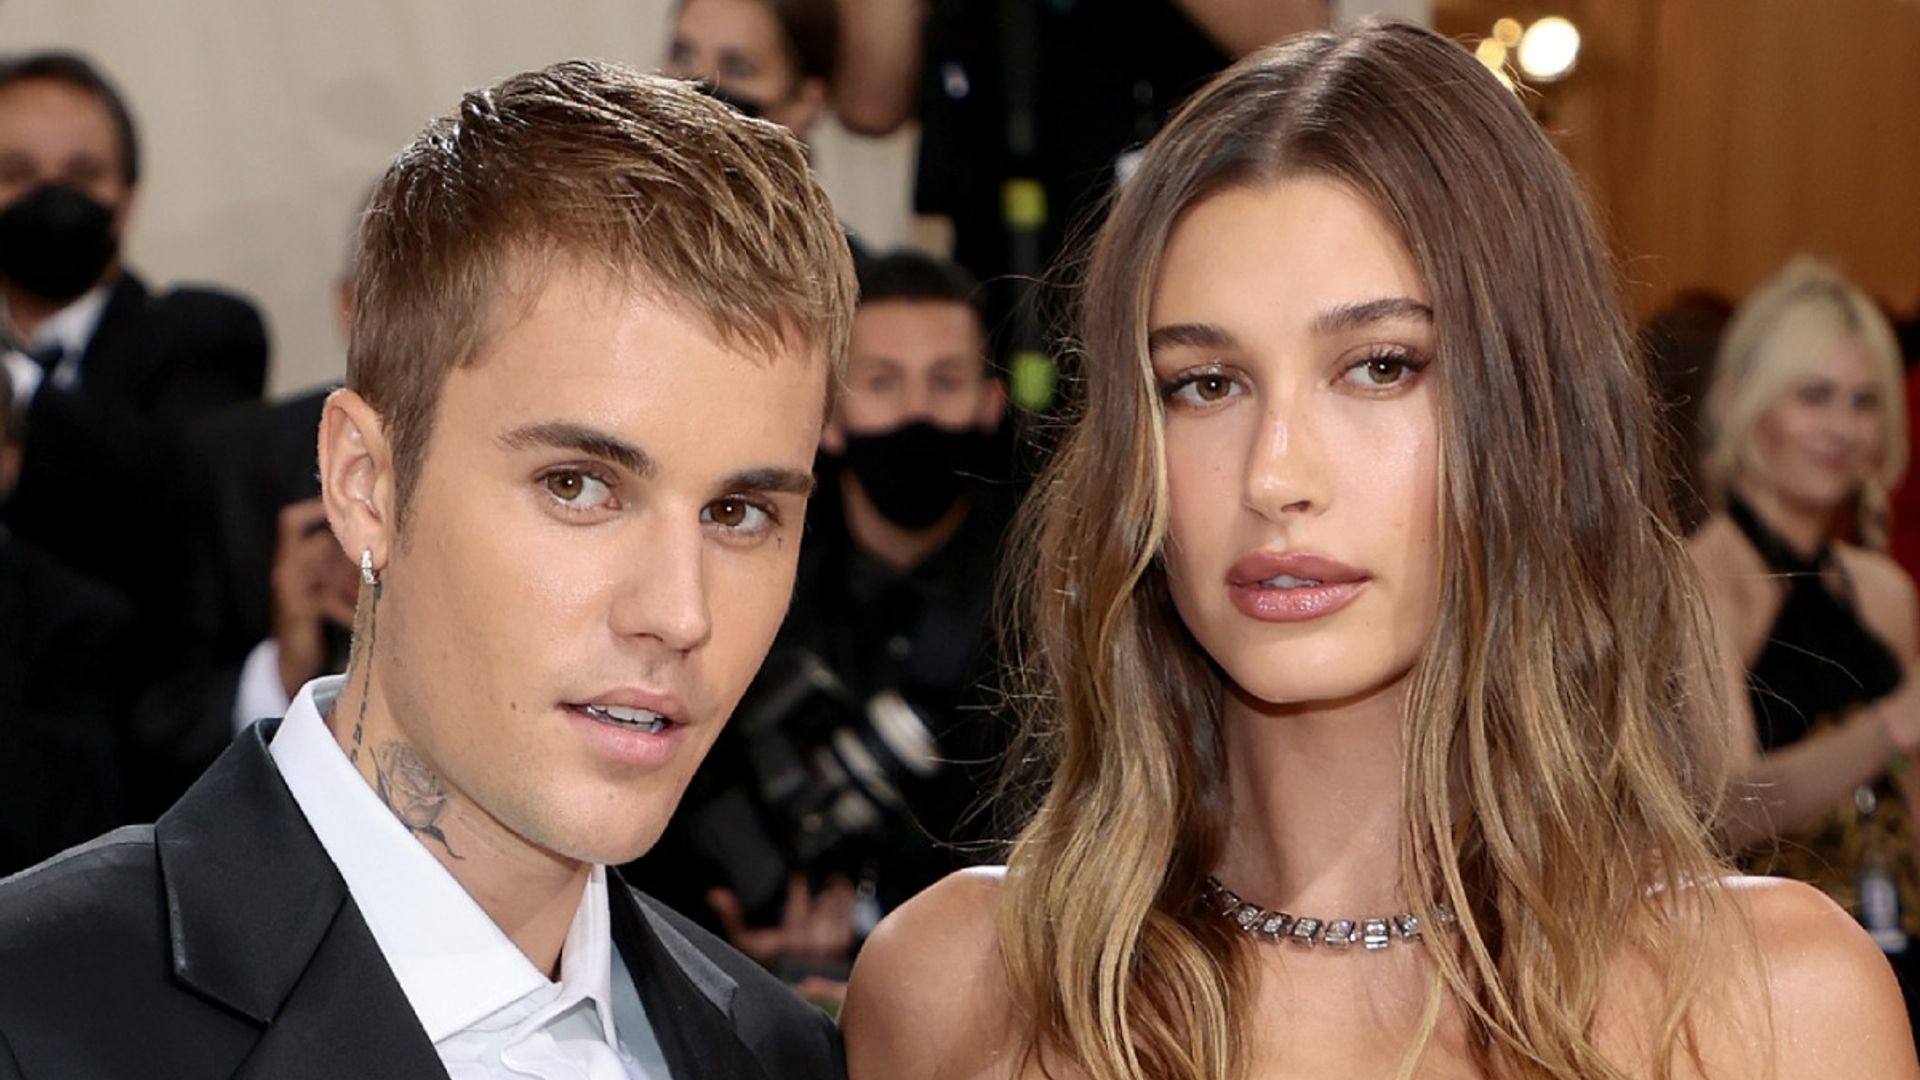 Hailey and Justin Bieber celebrate special news with fans at 2021 Met